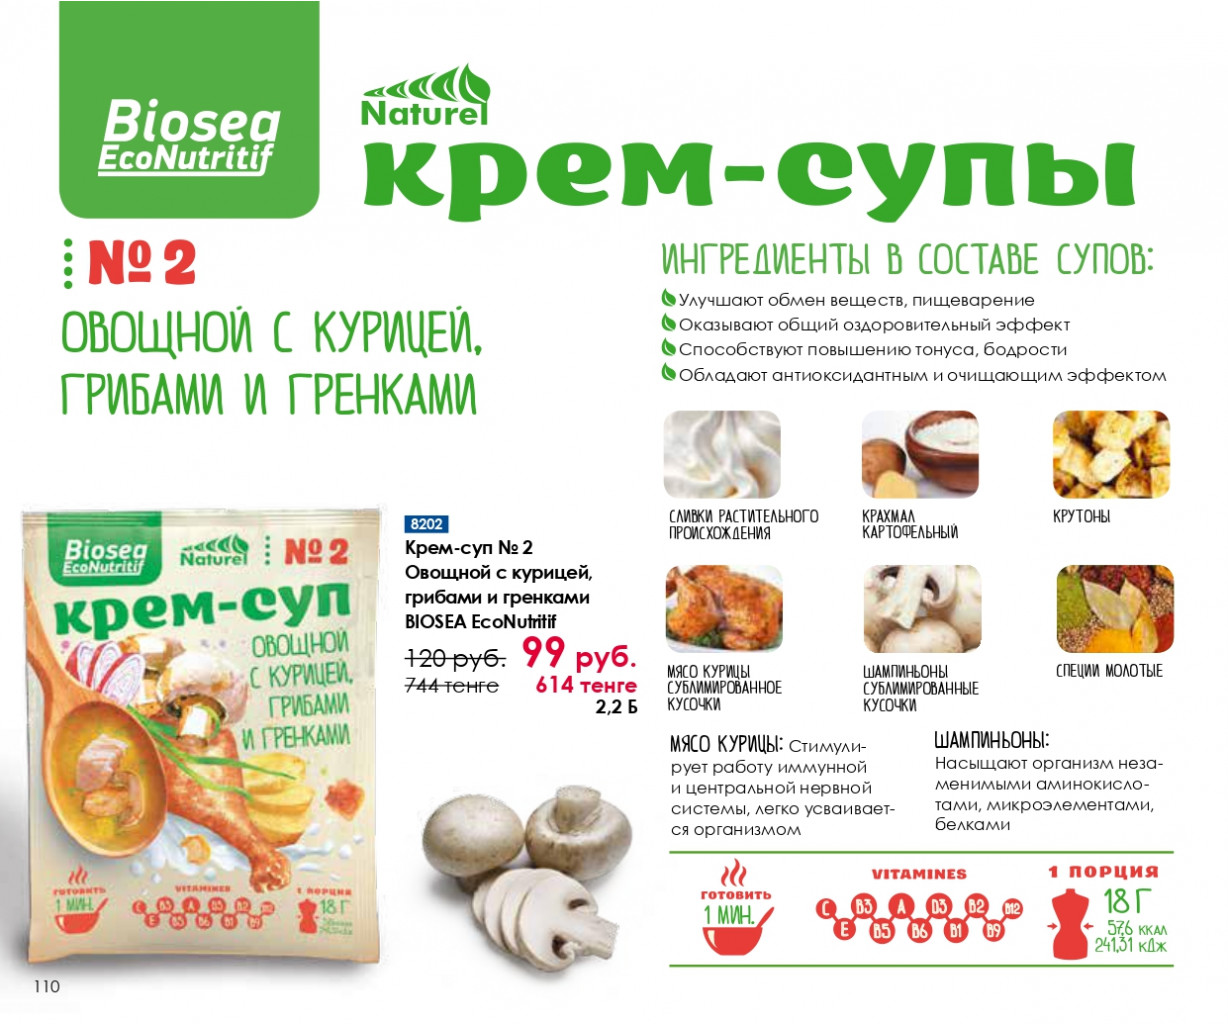 Catalog-biosea pages-to-jpg-0110.jpg